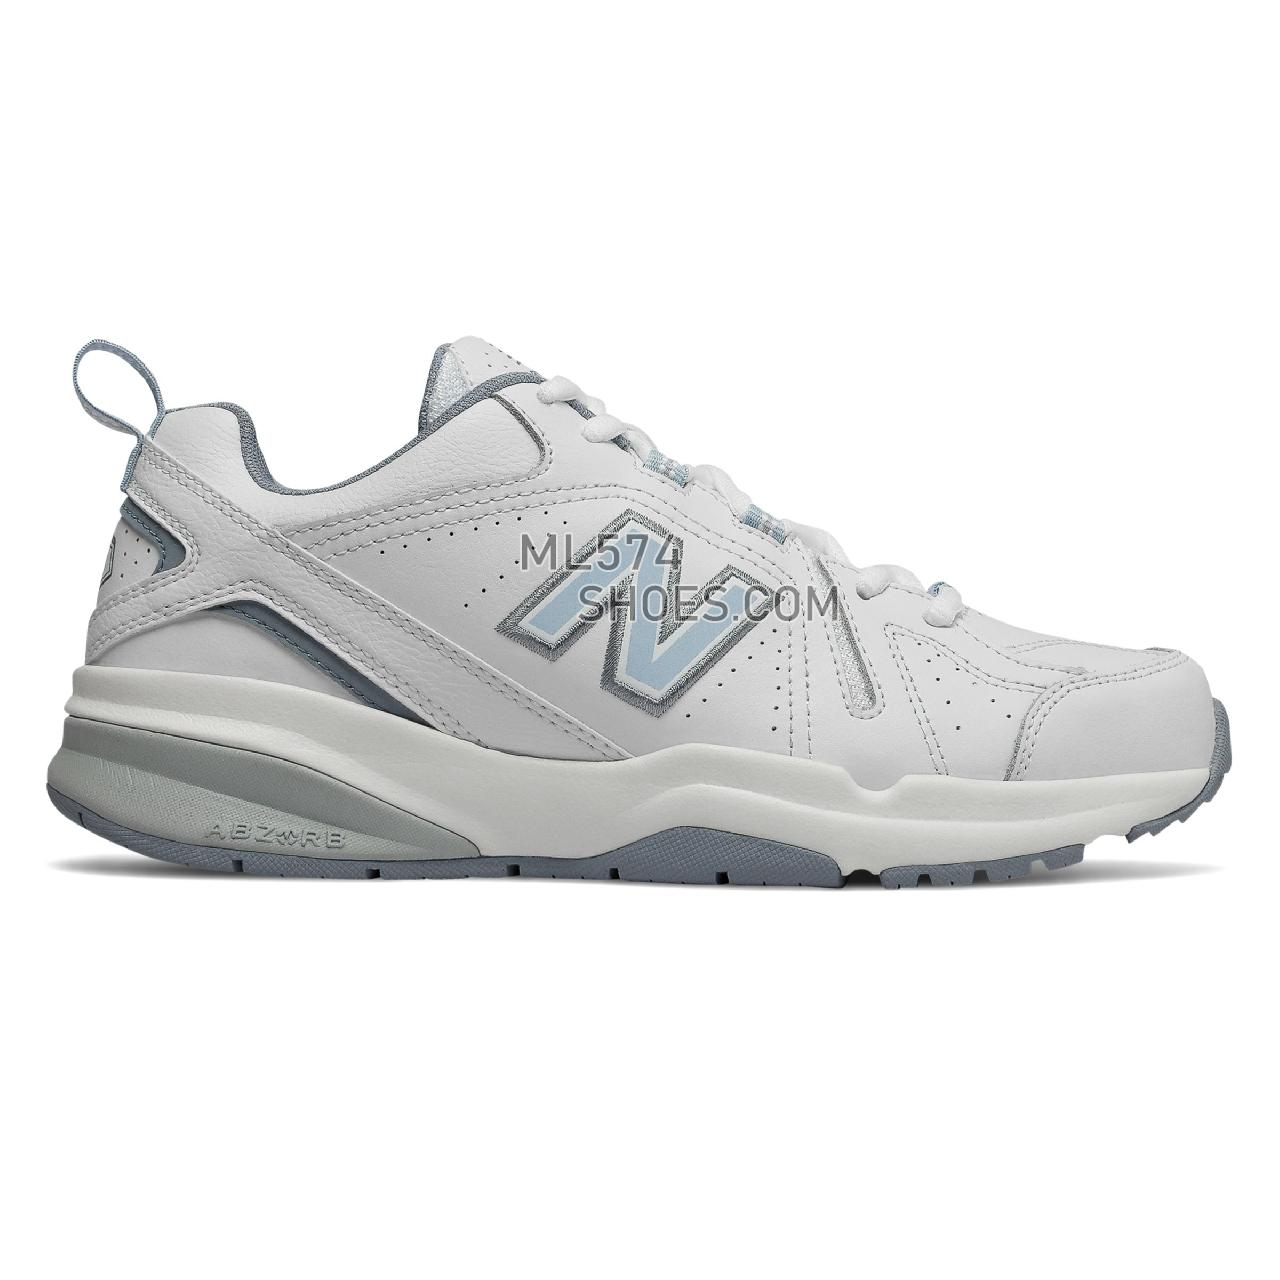 New Balance 608v5 - Women's Everyday Trainers - White with Light Blue - WX608WB5